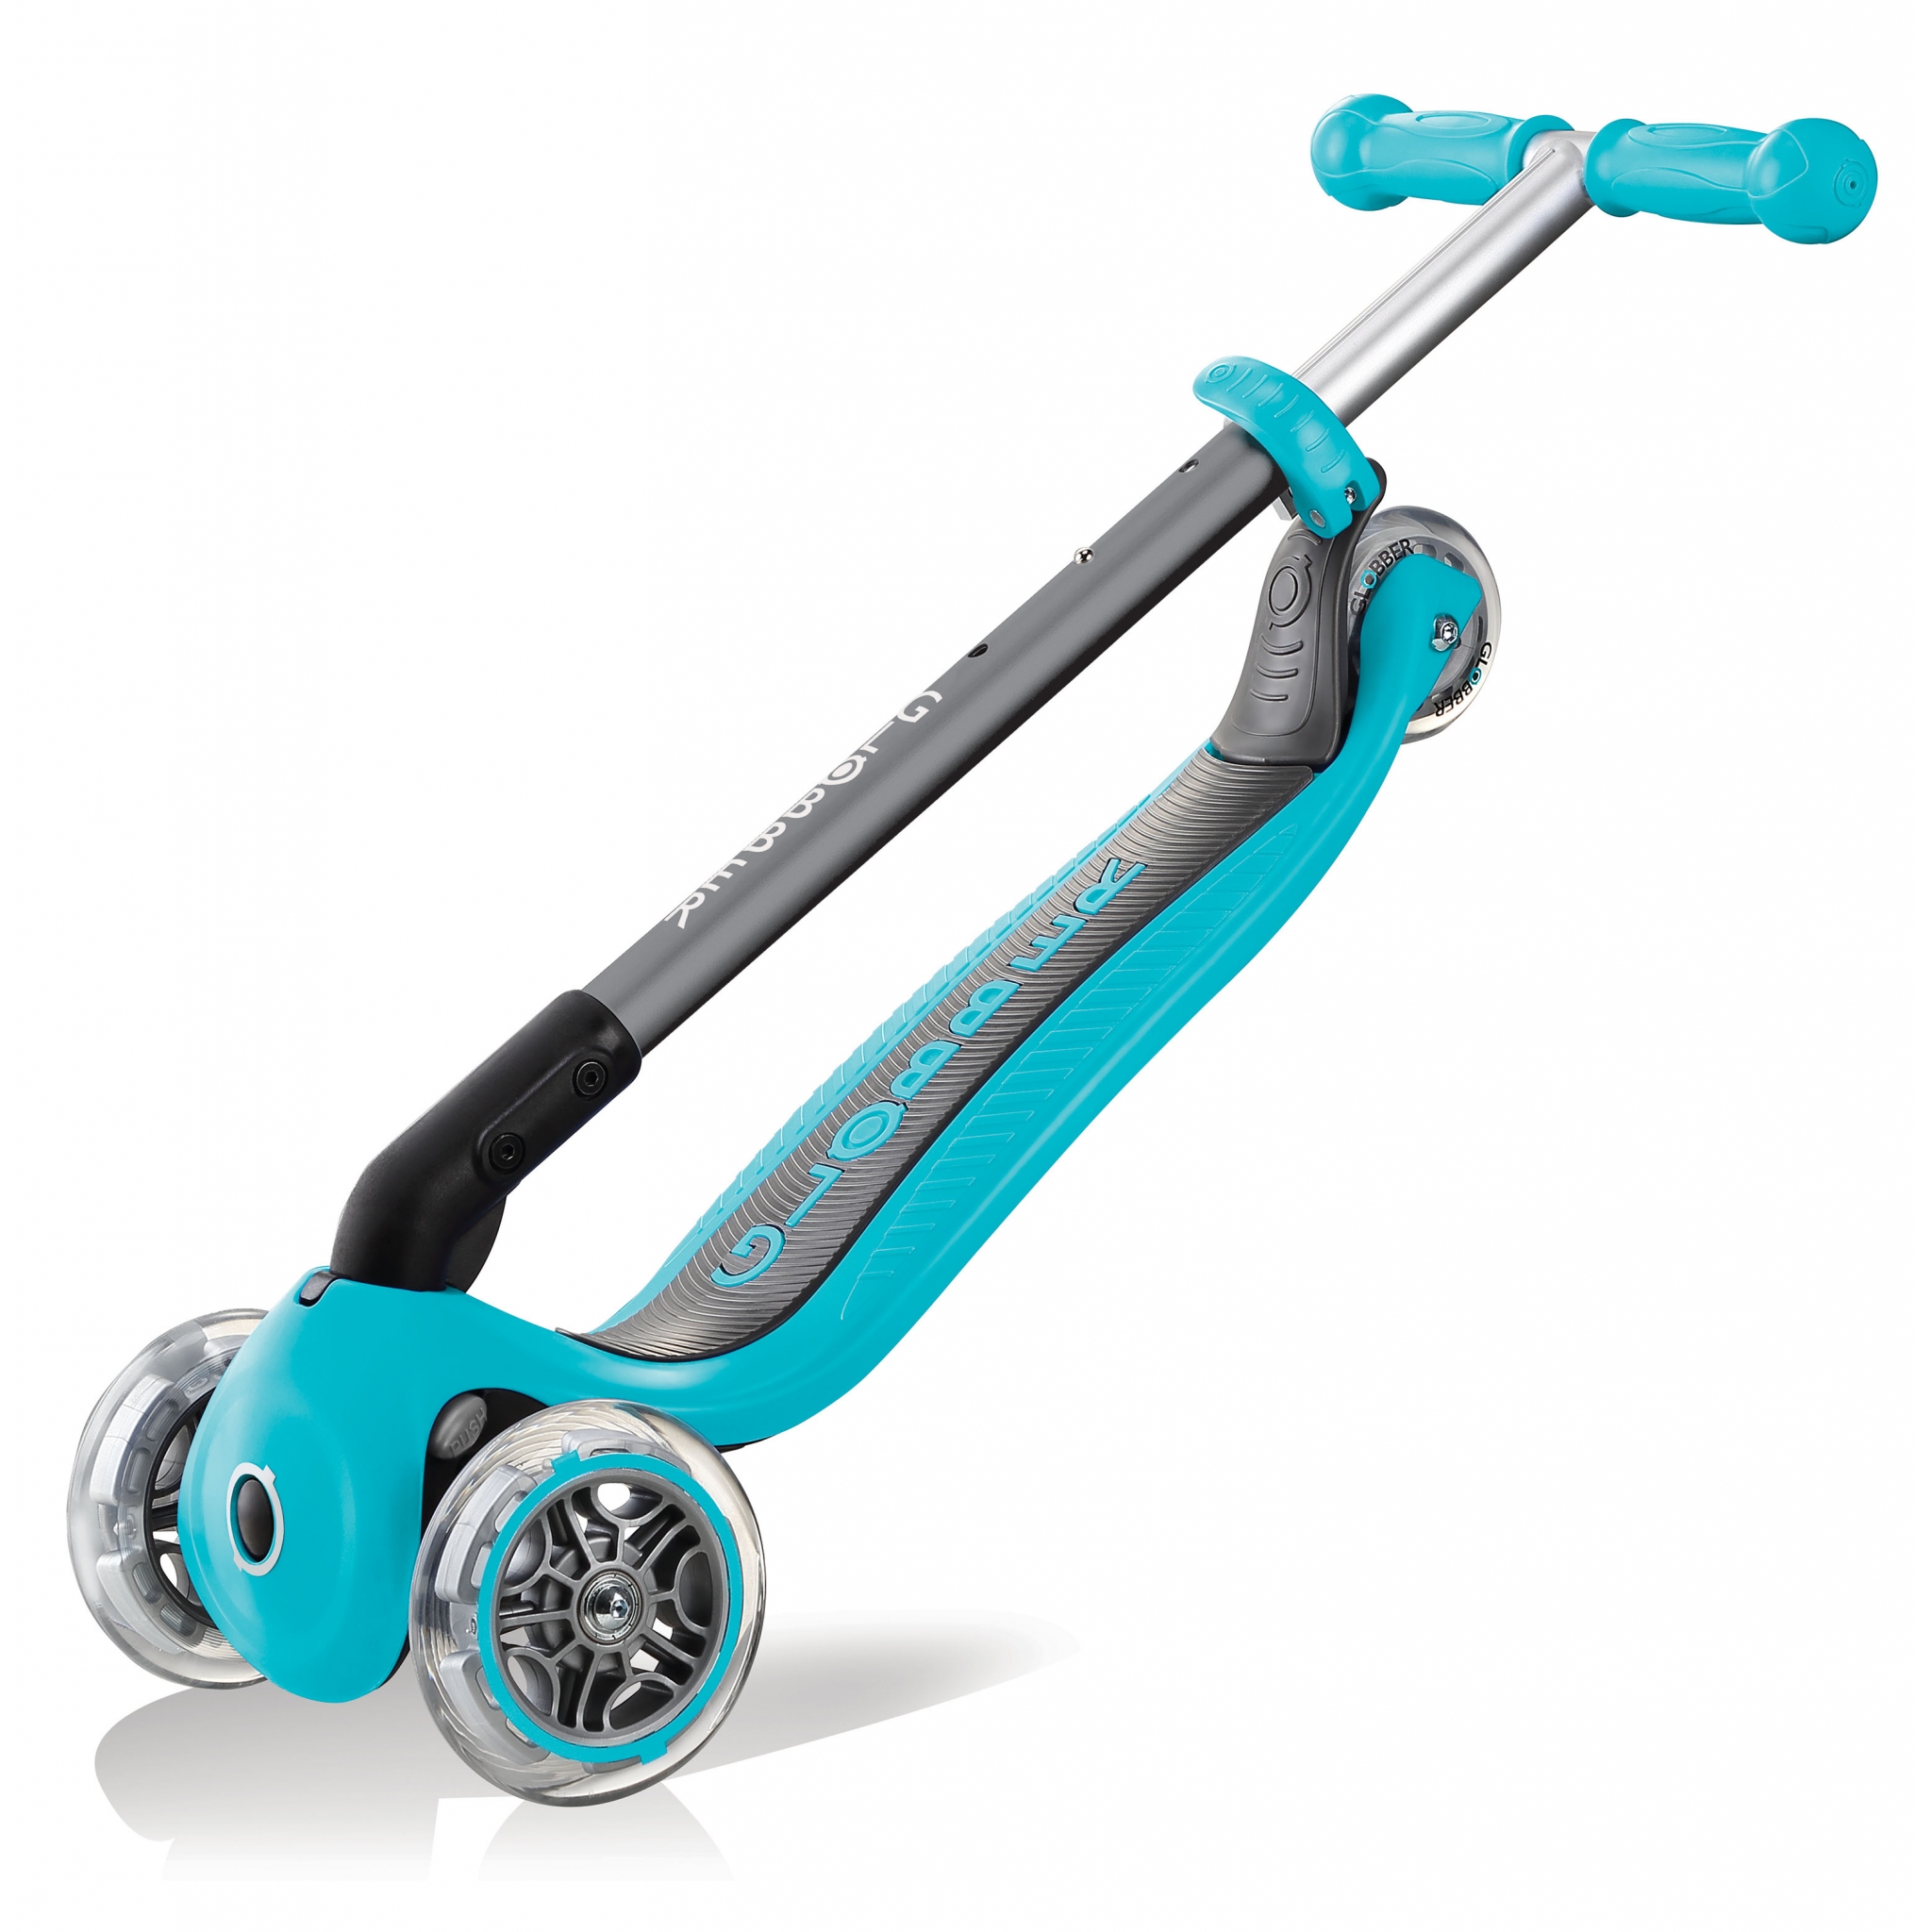 PRIMO-FOLDABLE-3-wheel-foldable-scooter-for-kids-trolley-mode-teal 4